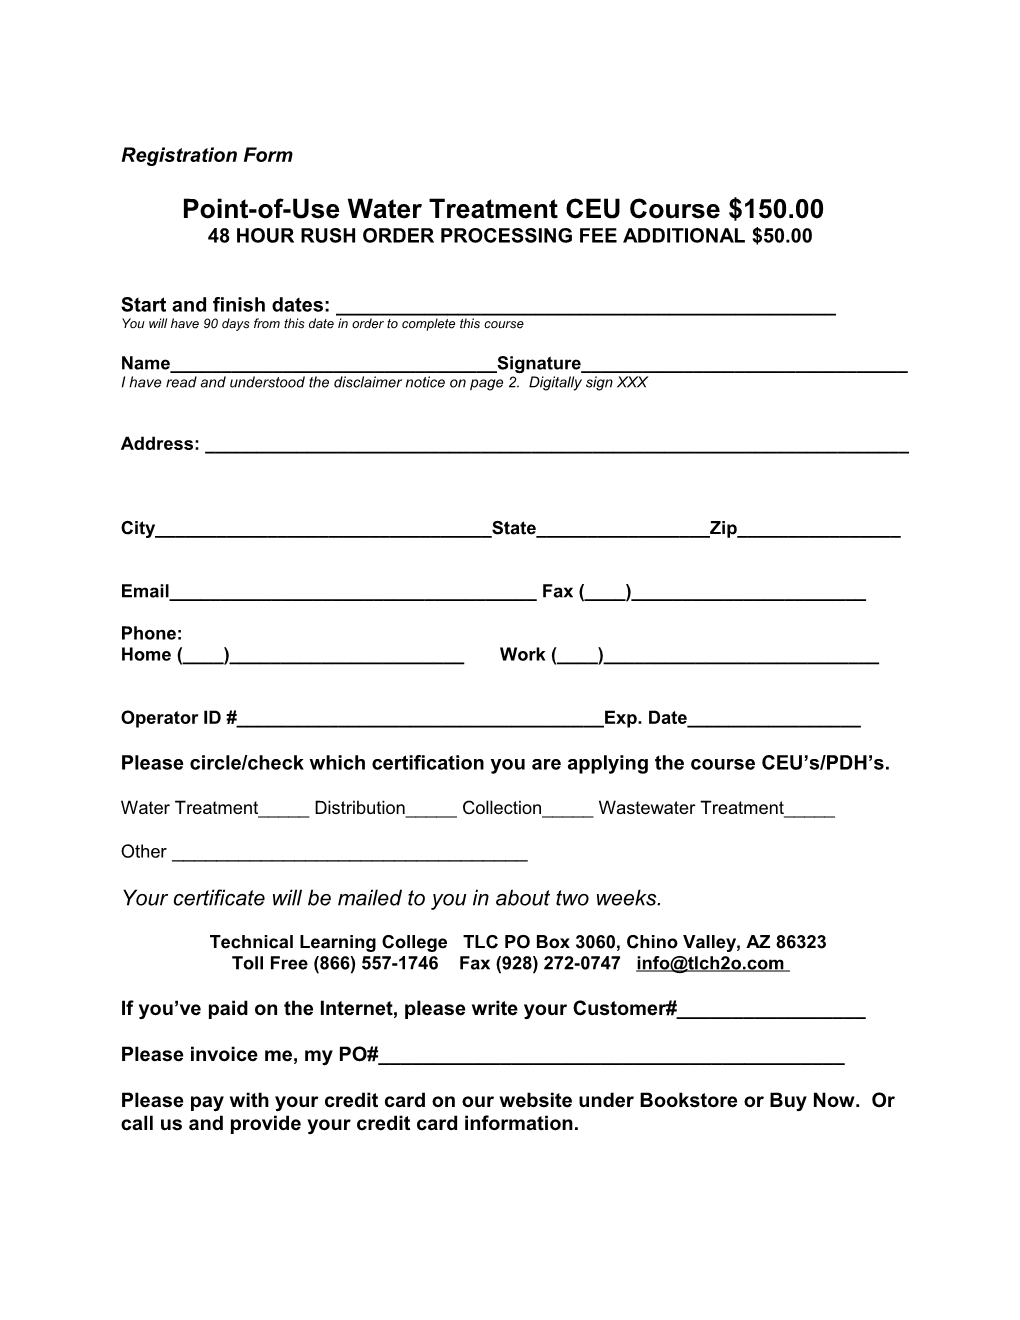 Point-Of-Use Water Treatment CEU Course $150.00